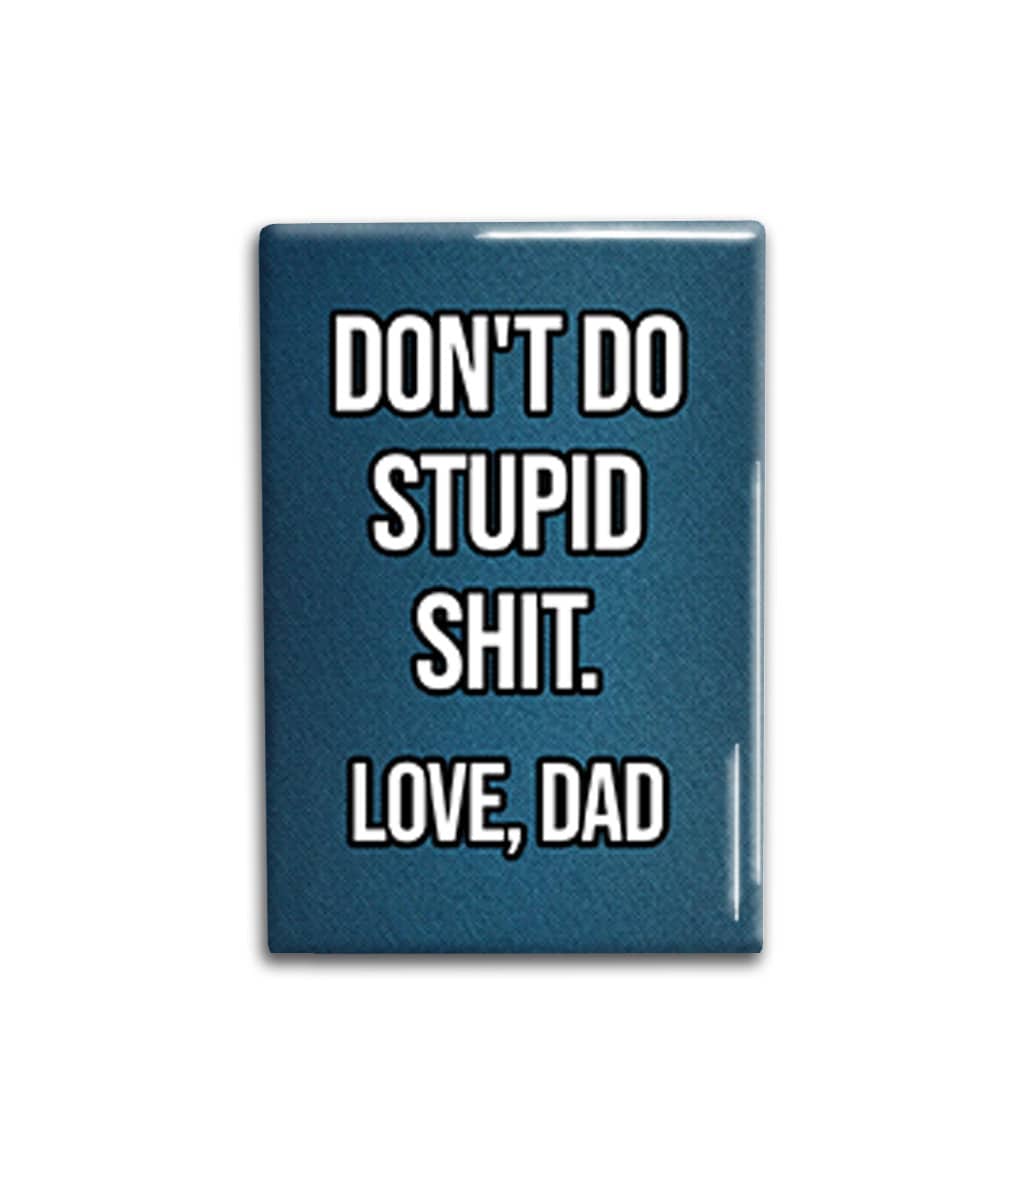 Don't Do Stupid Sh*t Love Dad Magnet Decorative Magnet- Funny Refrigerator Magnet 2x3 inches